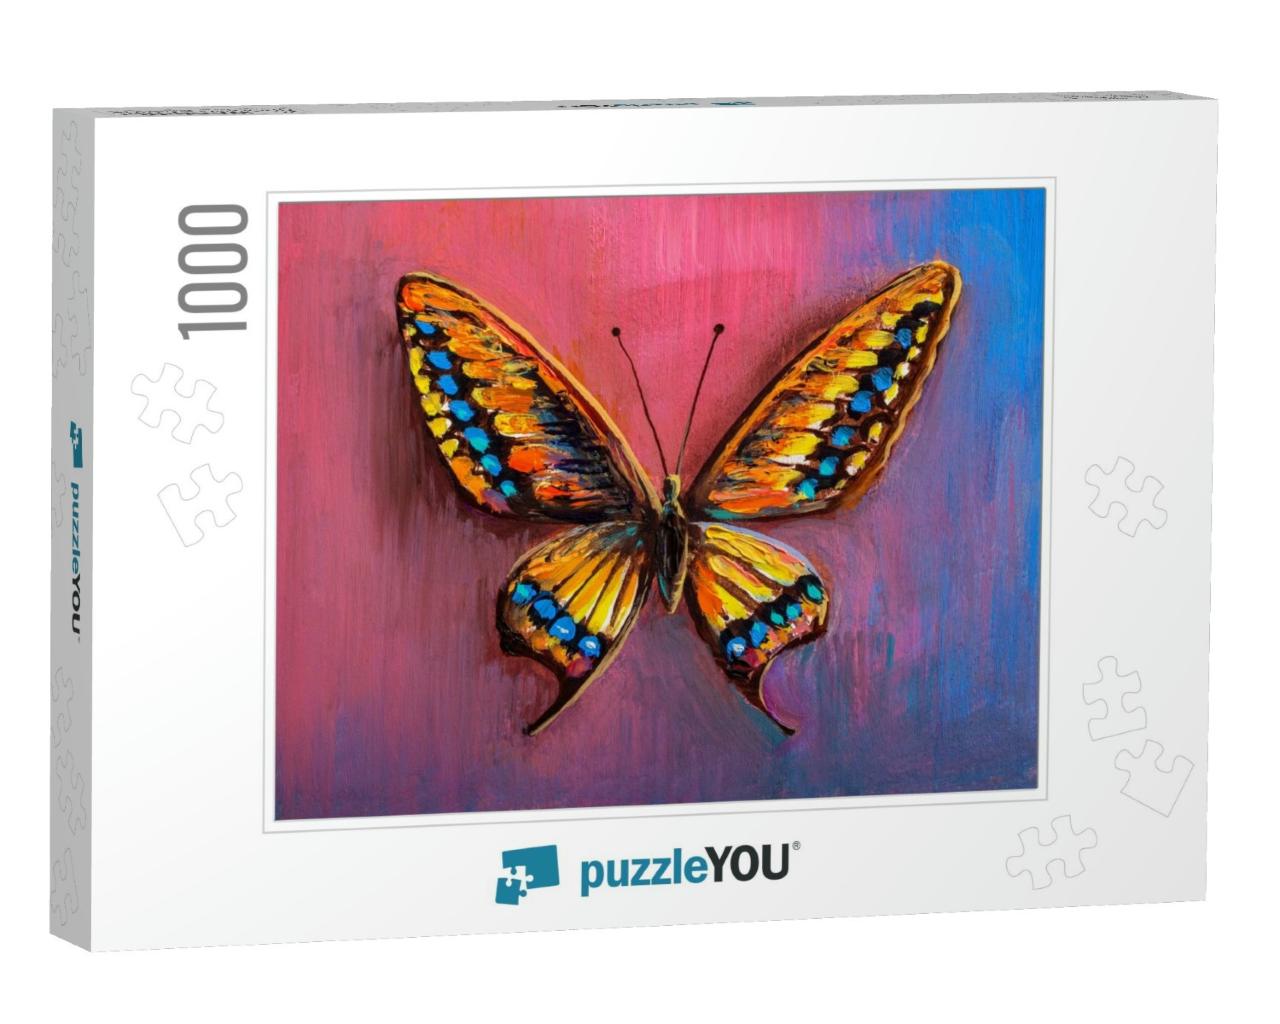 Oil Painting of Butterfly... Jigsaw Puzzle with 1000 pieces